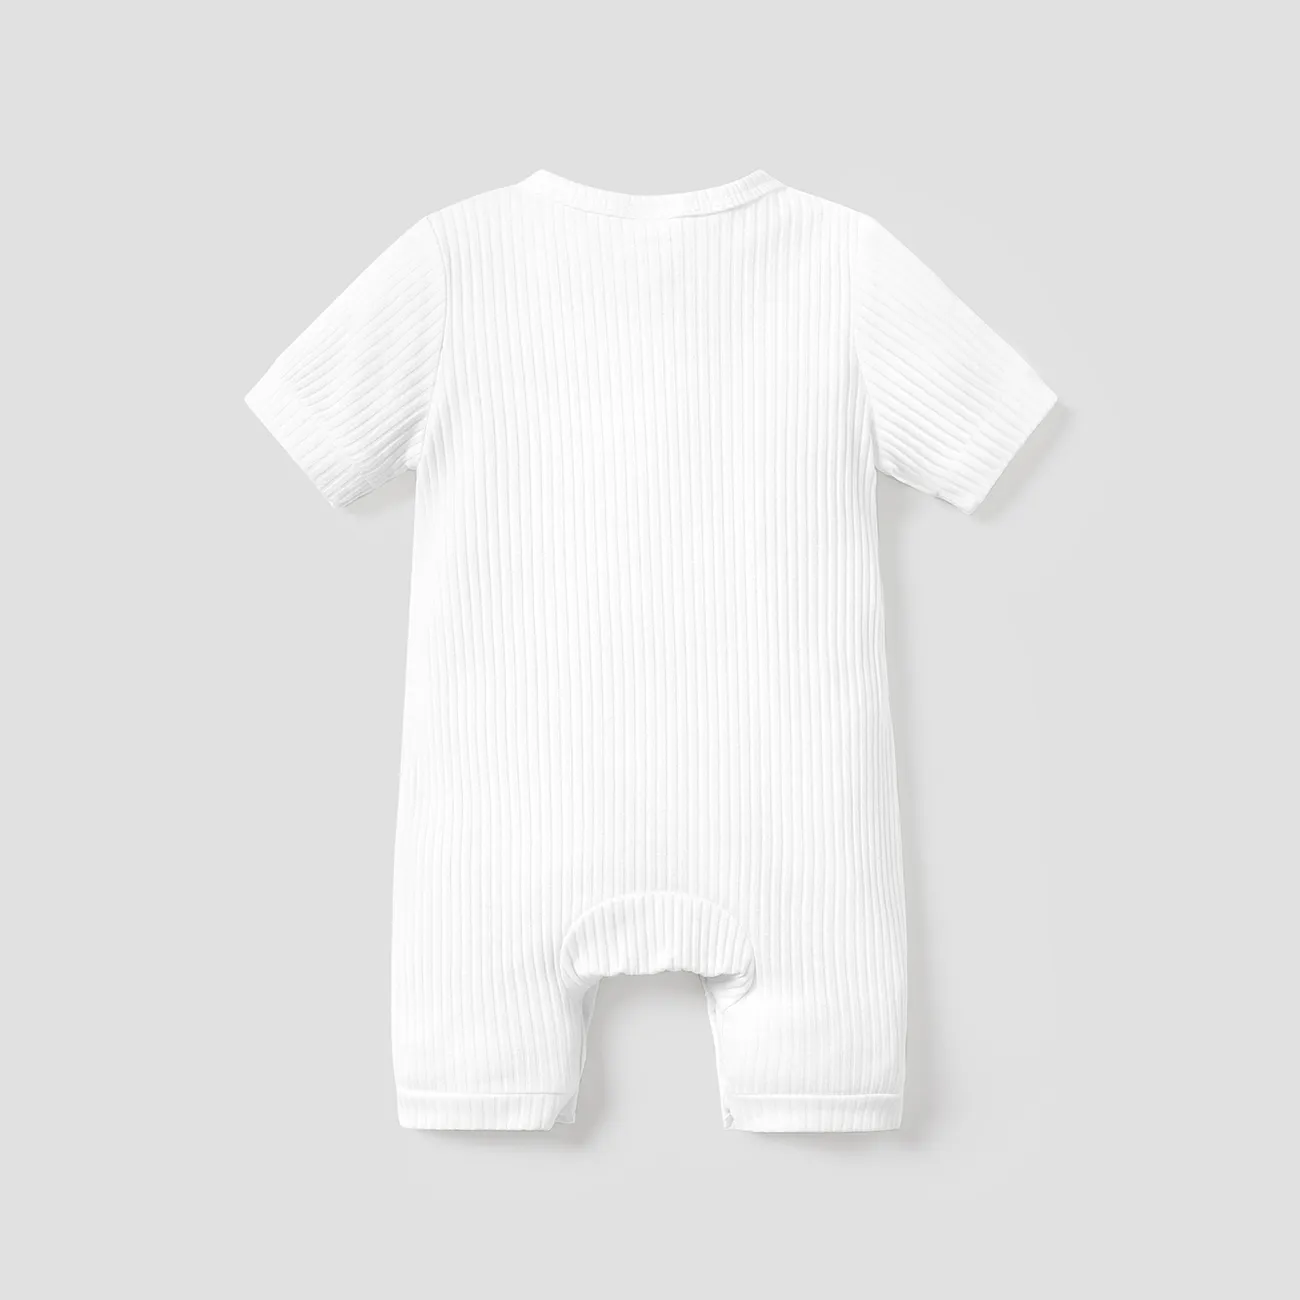 Baby Boy/Girl 95% Cotton Ribbed Short-sleeve Button Up Romper White big image 1